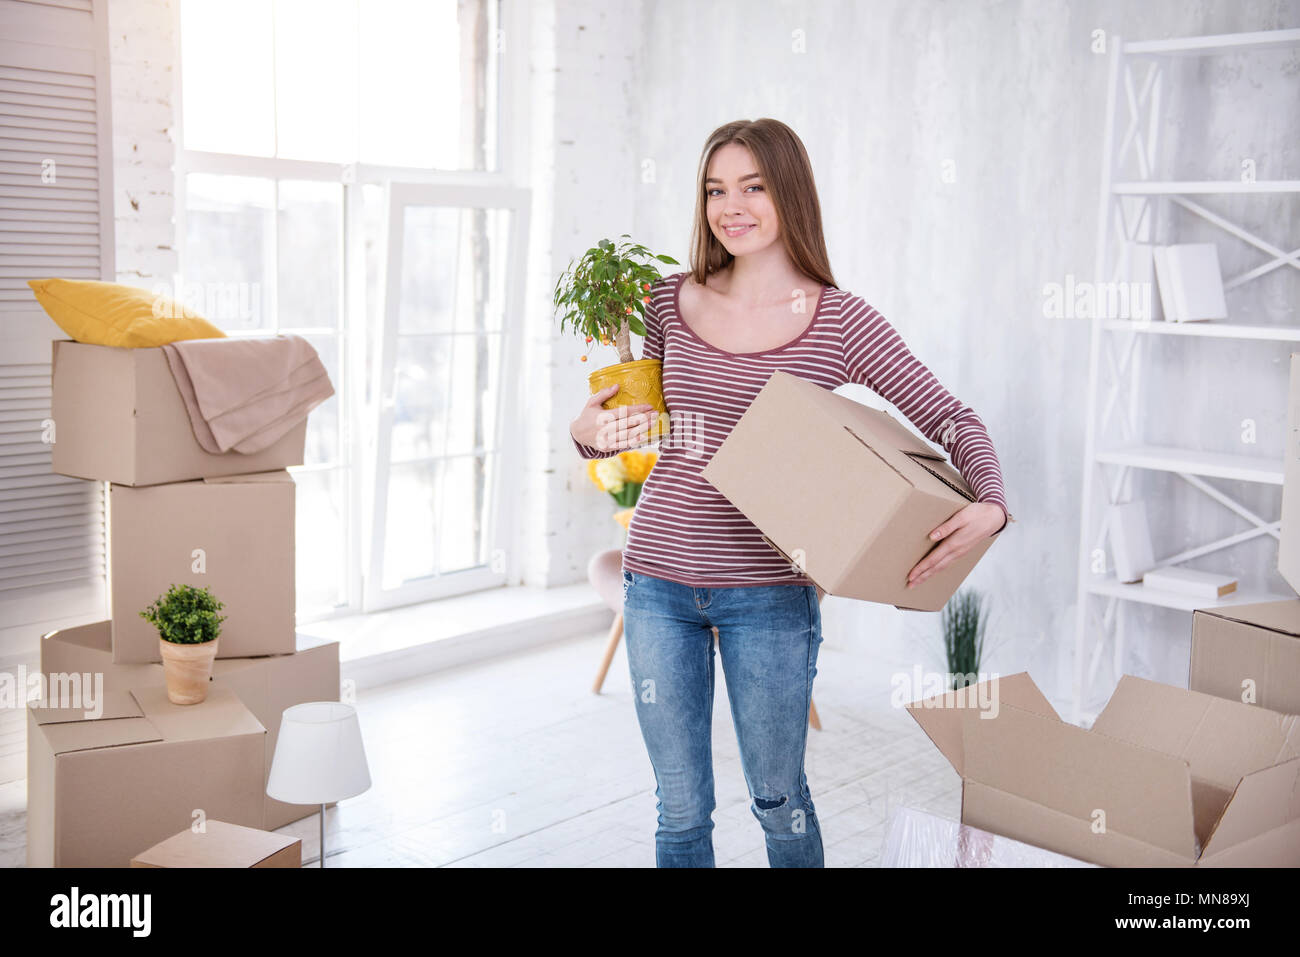 Cheerful young woman posing with plant and box Stock Photo